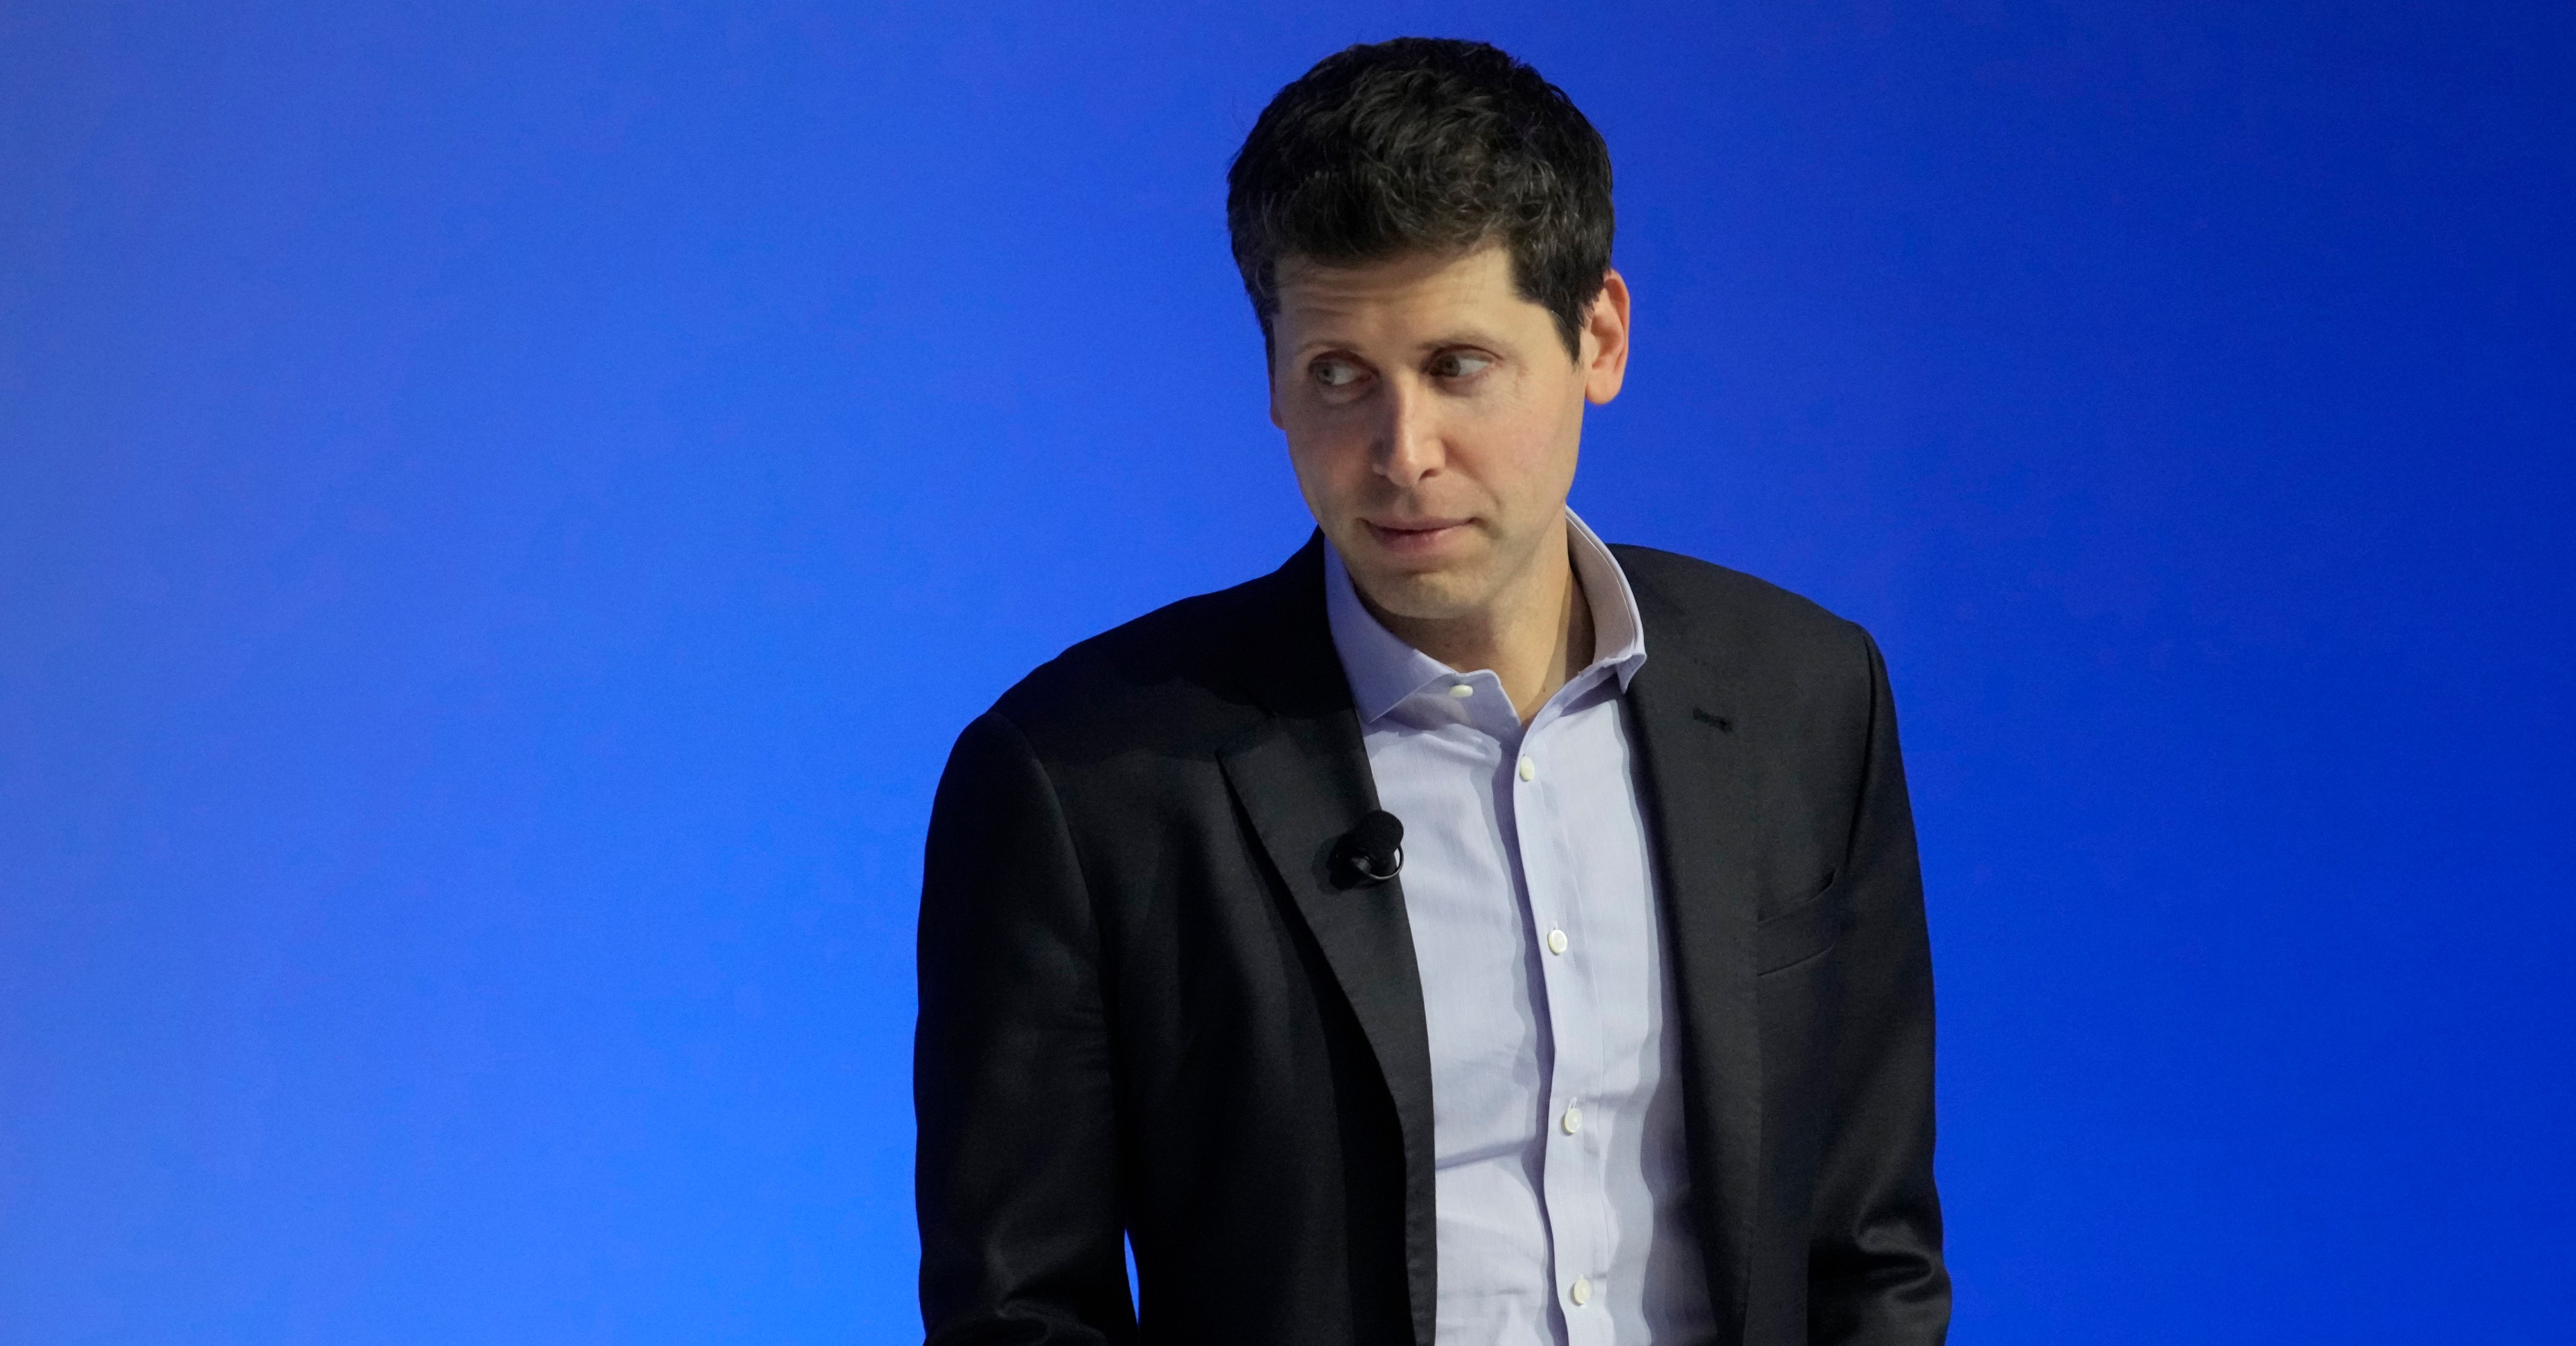 Sam Altman, CEO of OpenAI looks offscreen with a blue background.